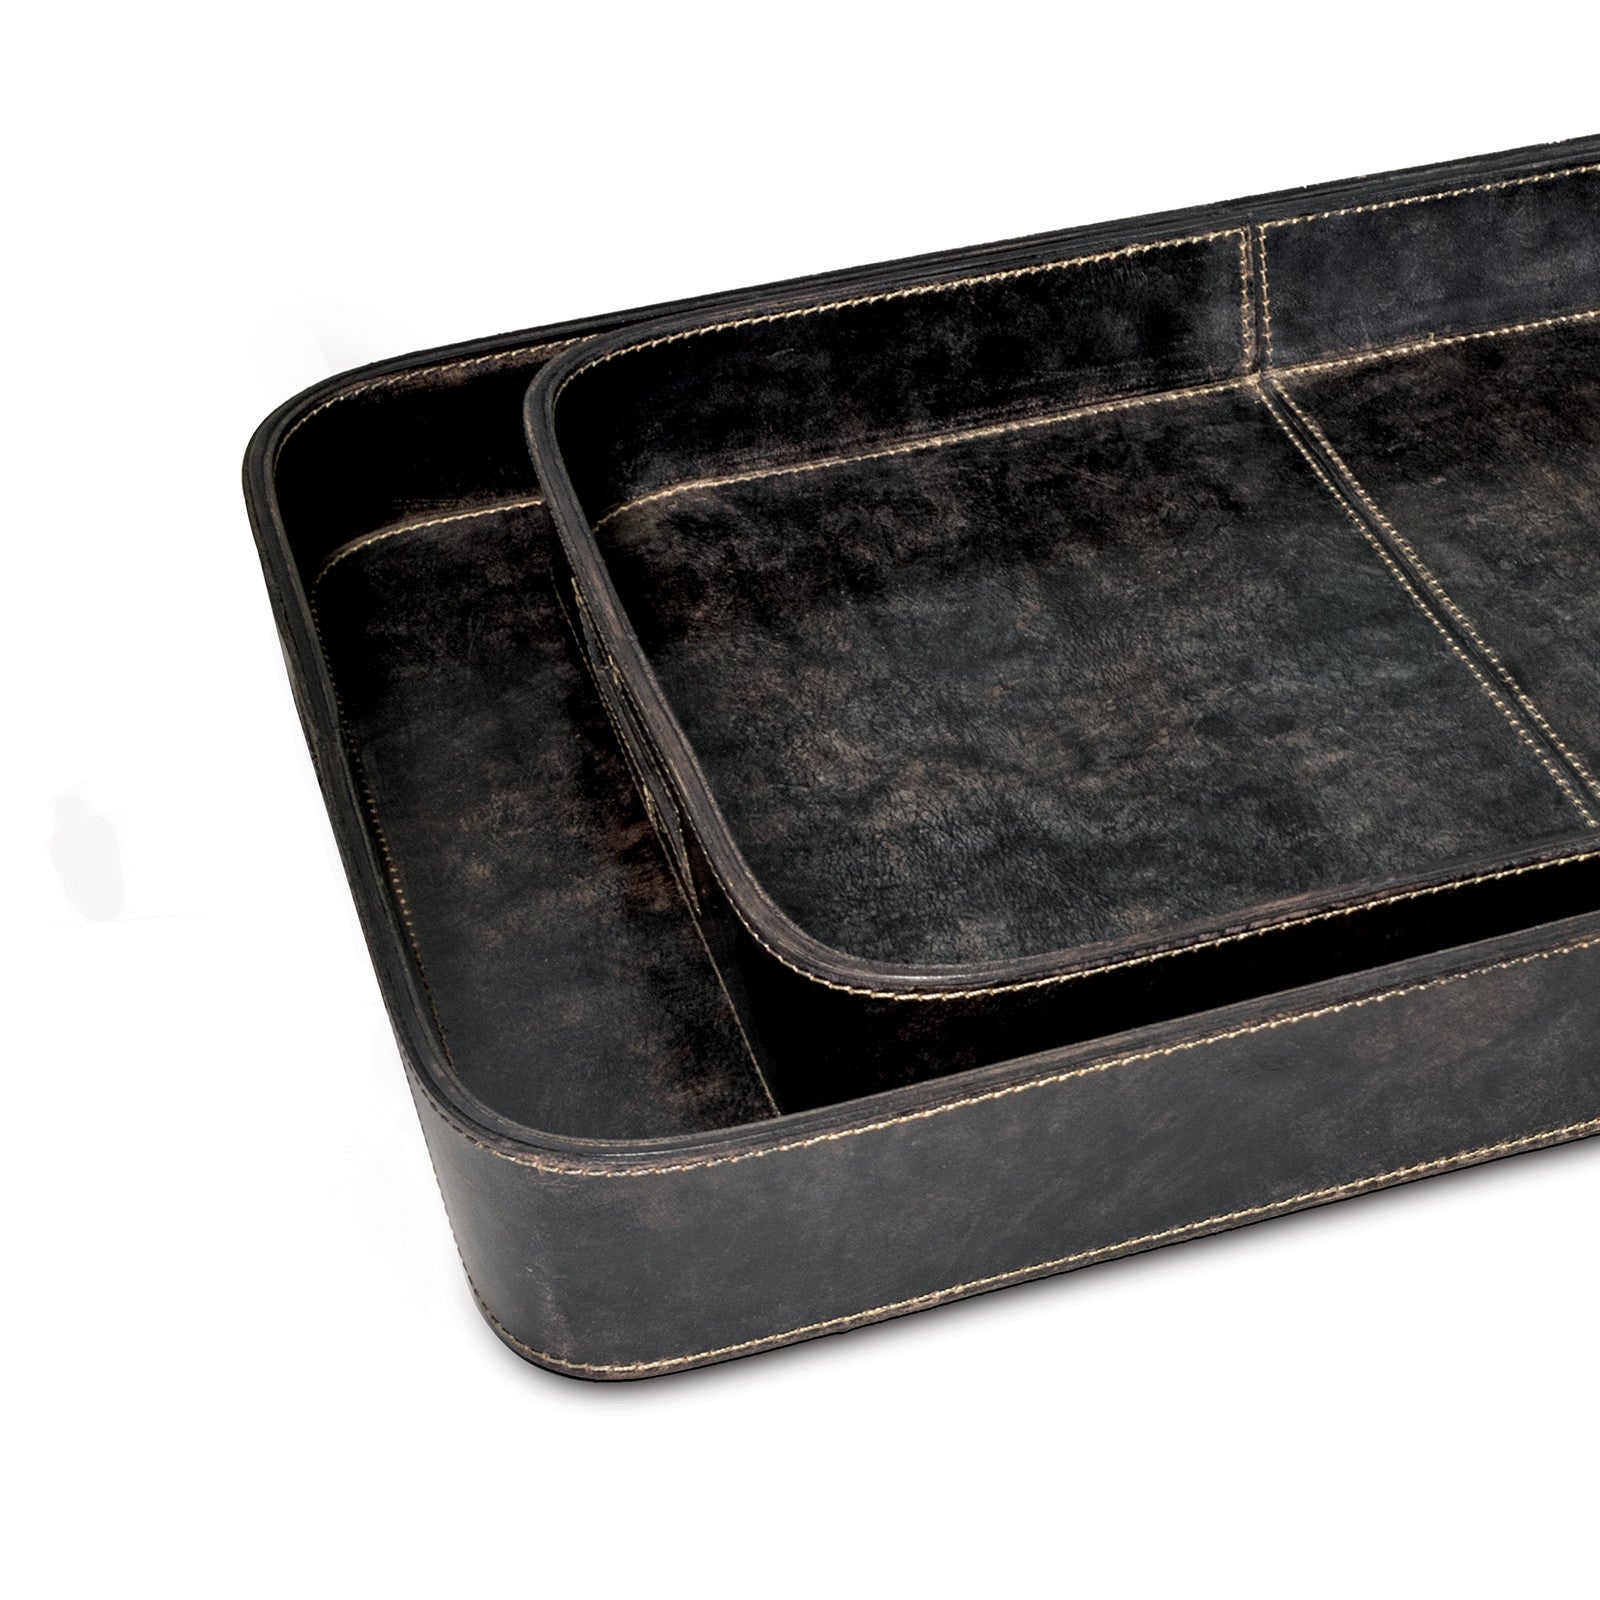 Derby Rectangle Leather Tray Set